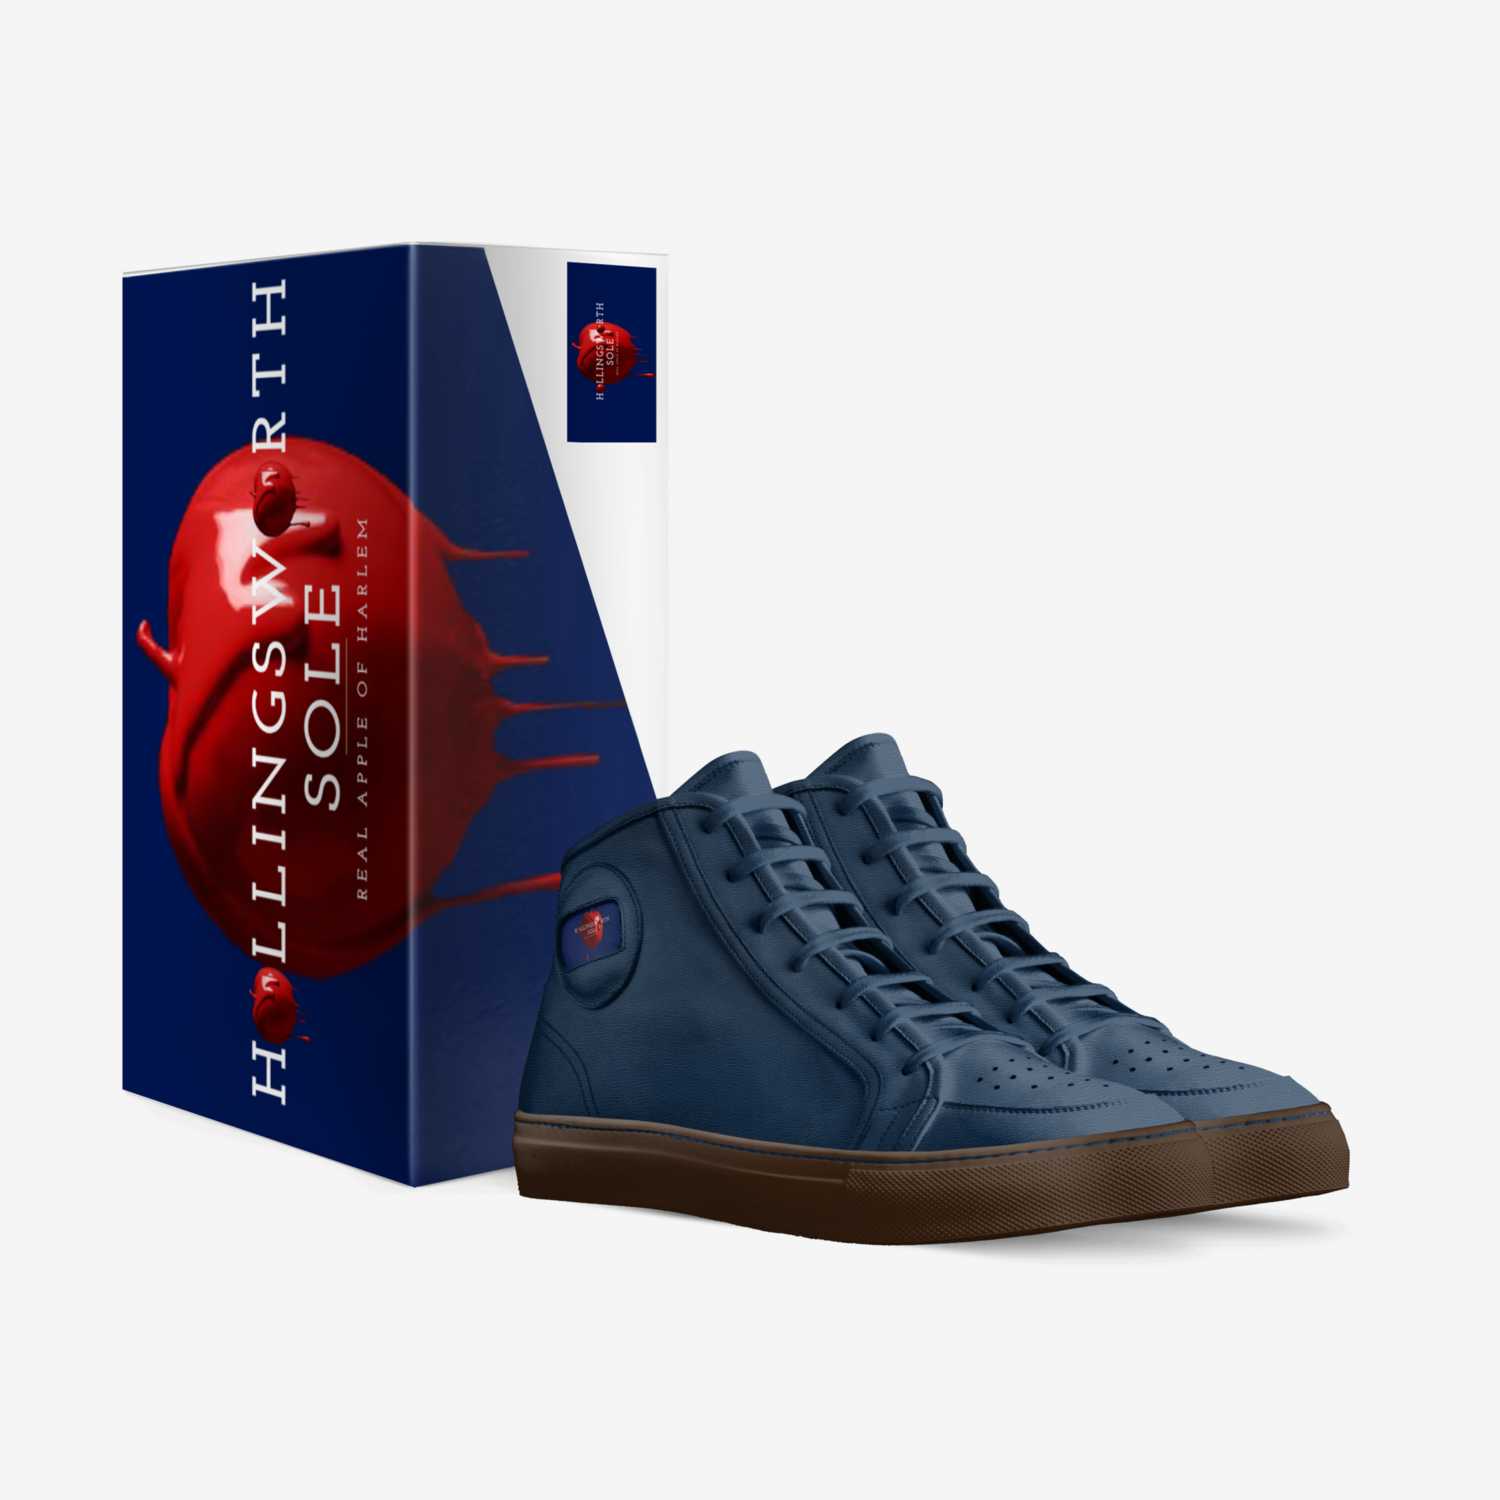 MB HIGH custom made in Italy shoes by O. Michael Hollingsworth | Box view